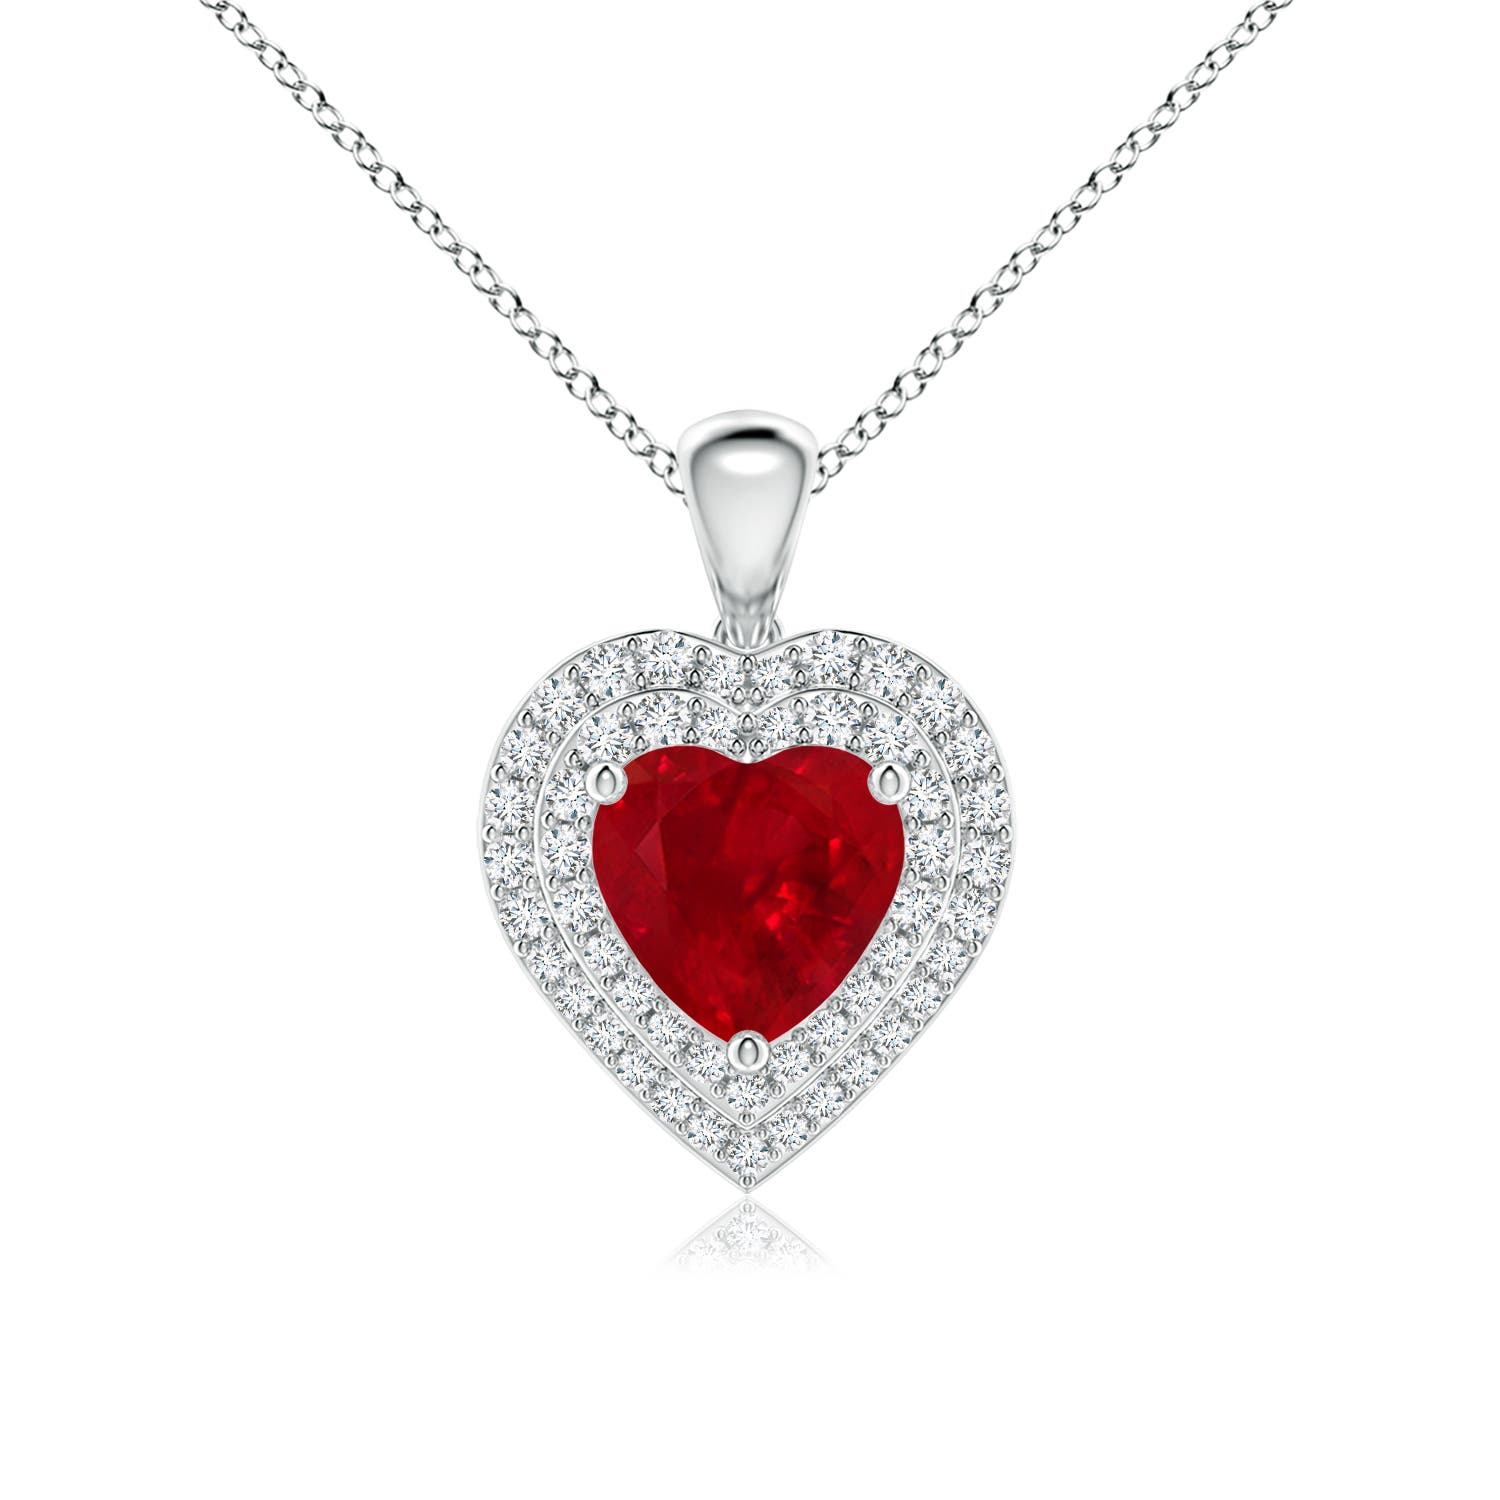 AAA - Ruby / 2.08 CT / 14 KT White Gold